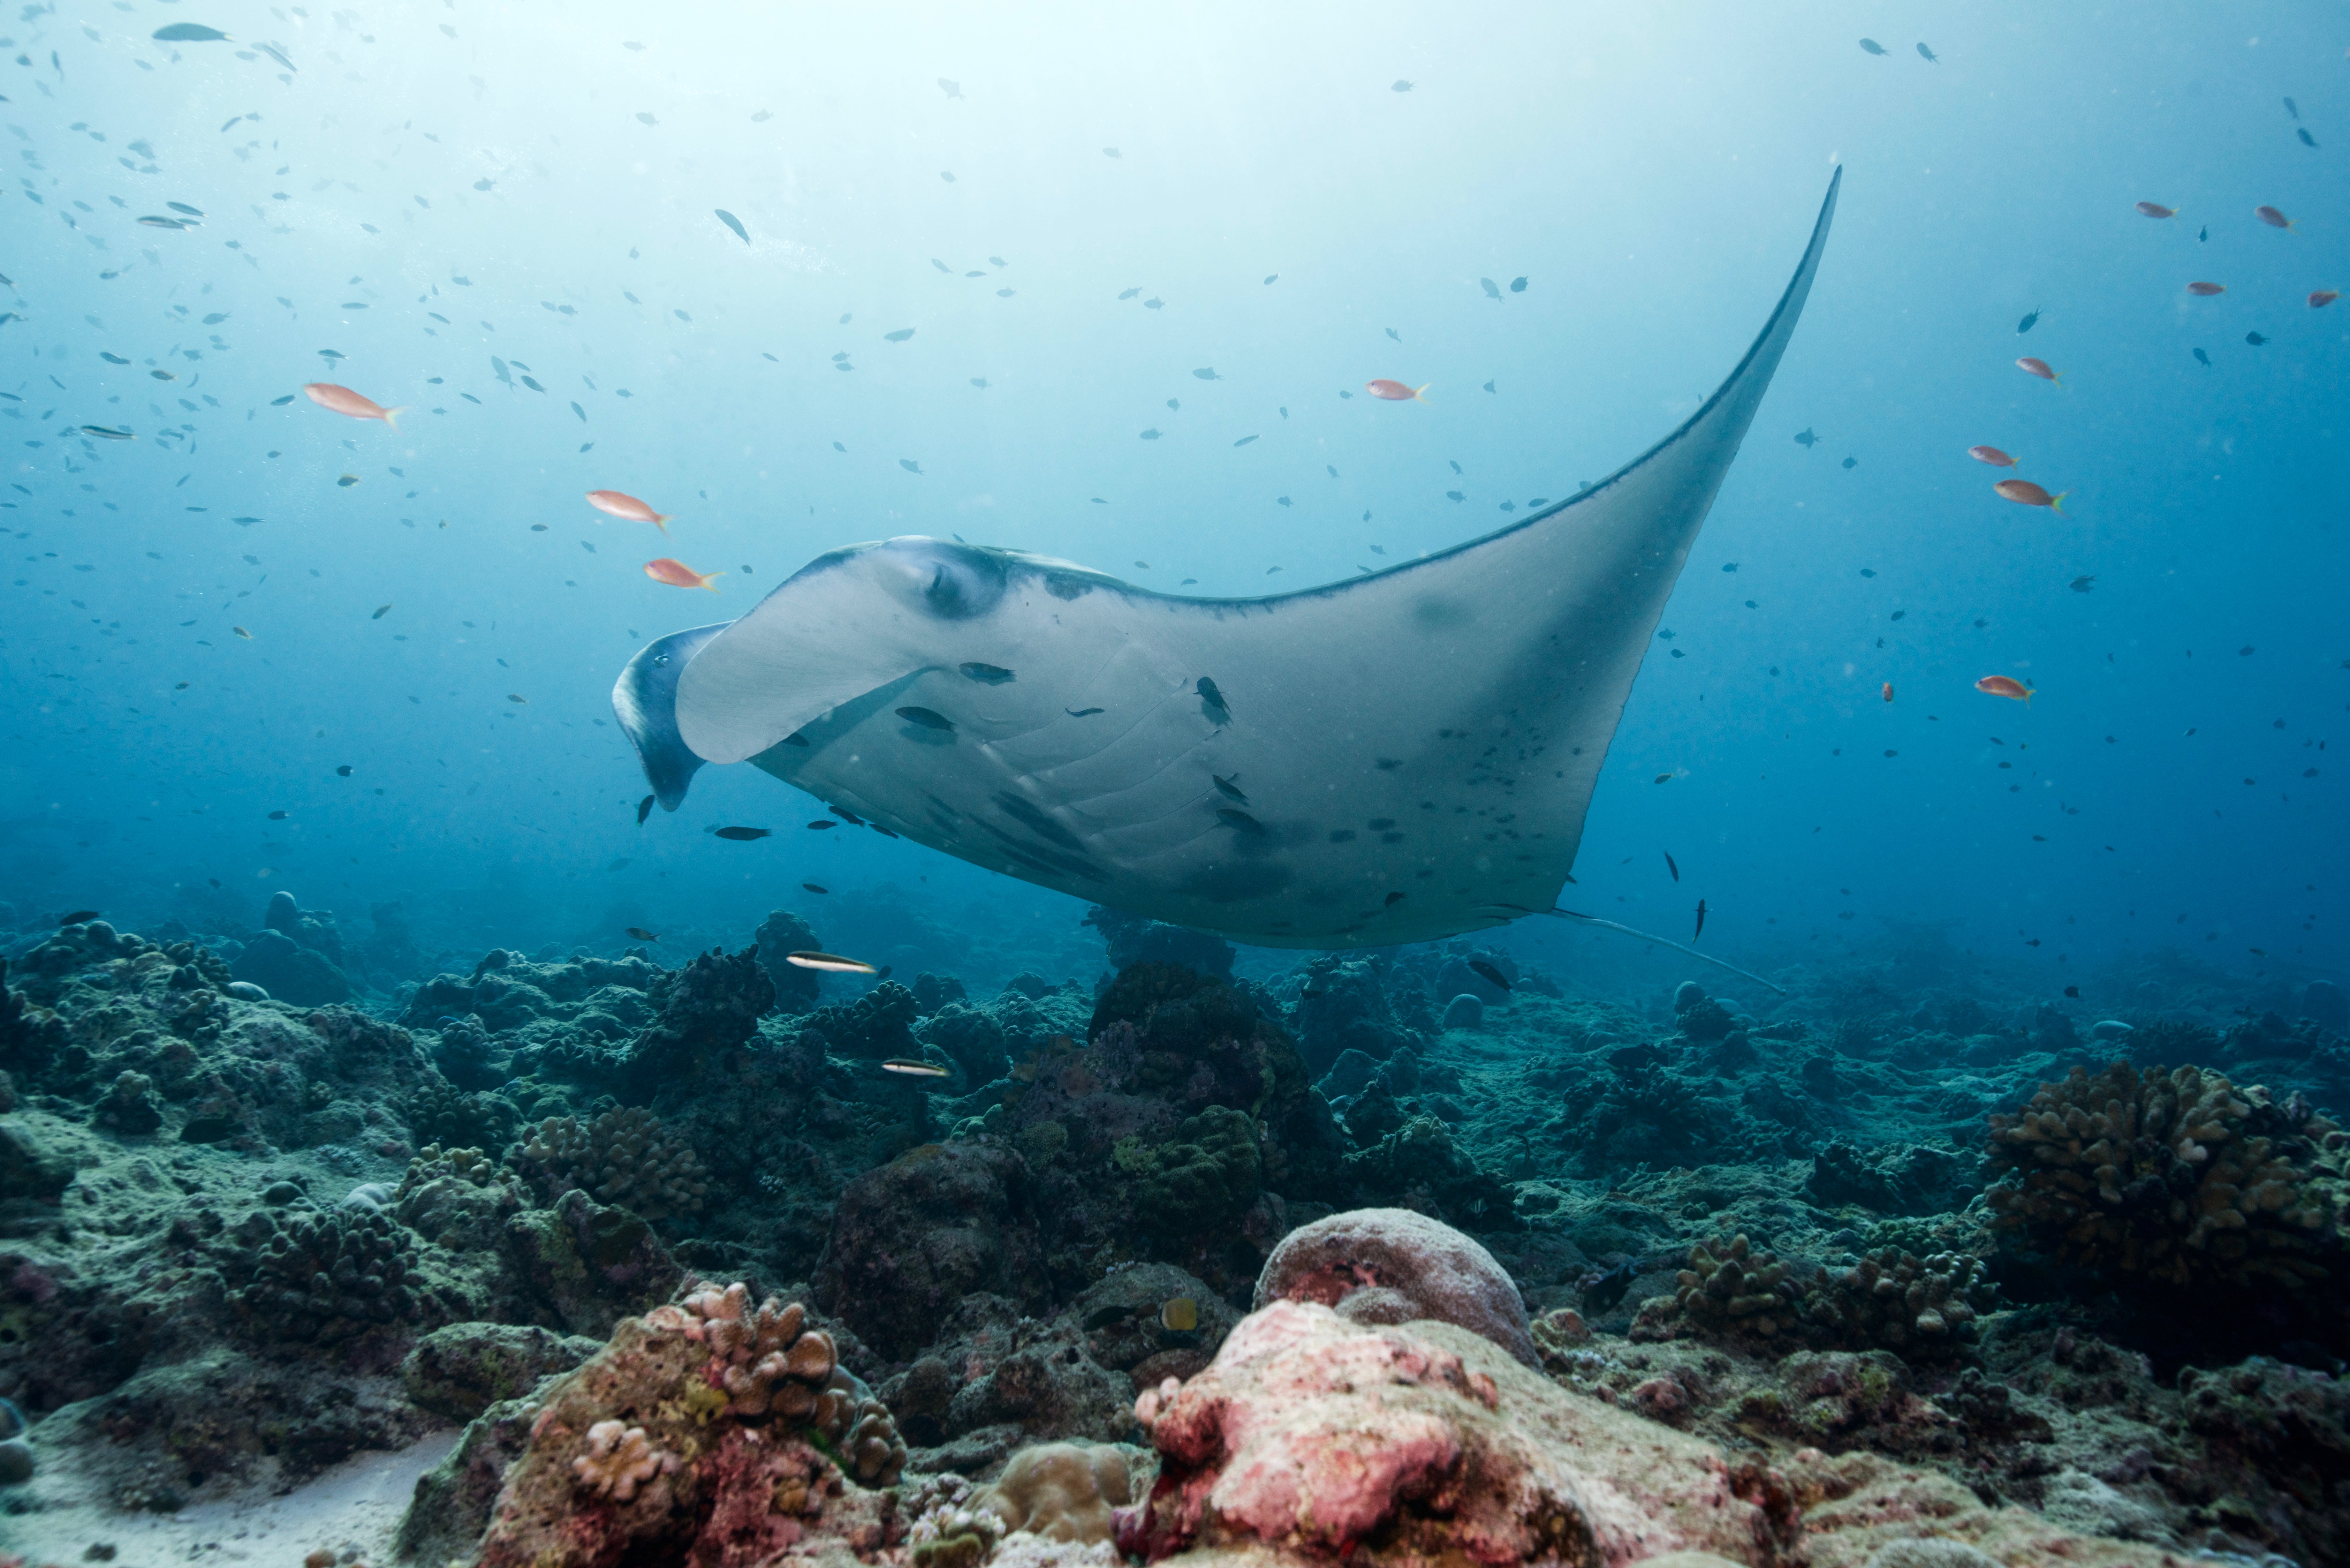 A manta ray in a cleaning station. Photo credit: Jürgen Gangoly